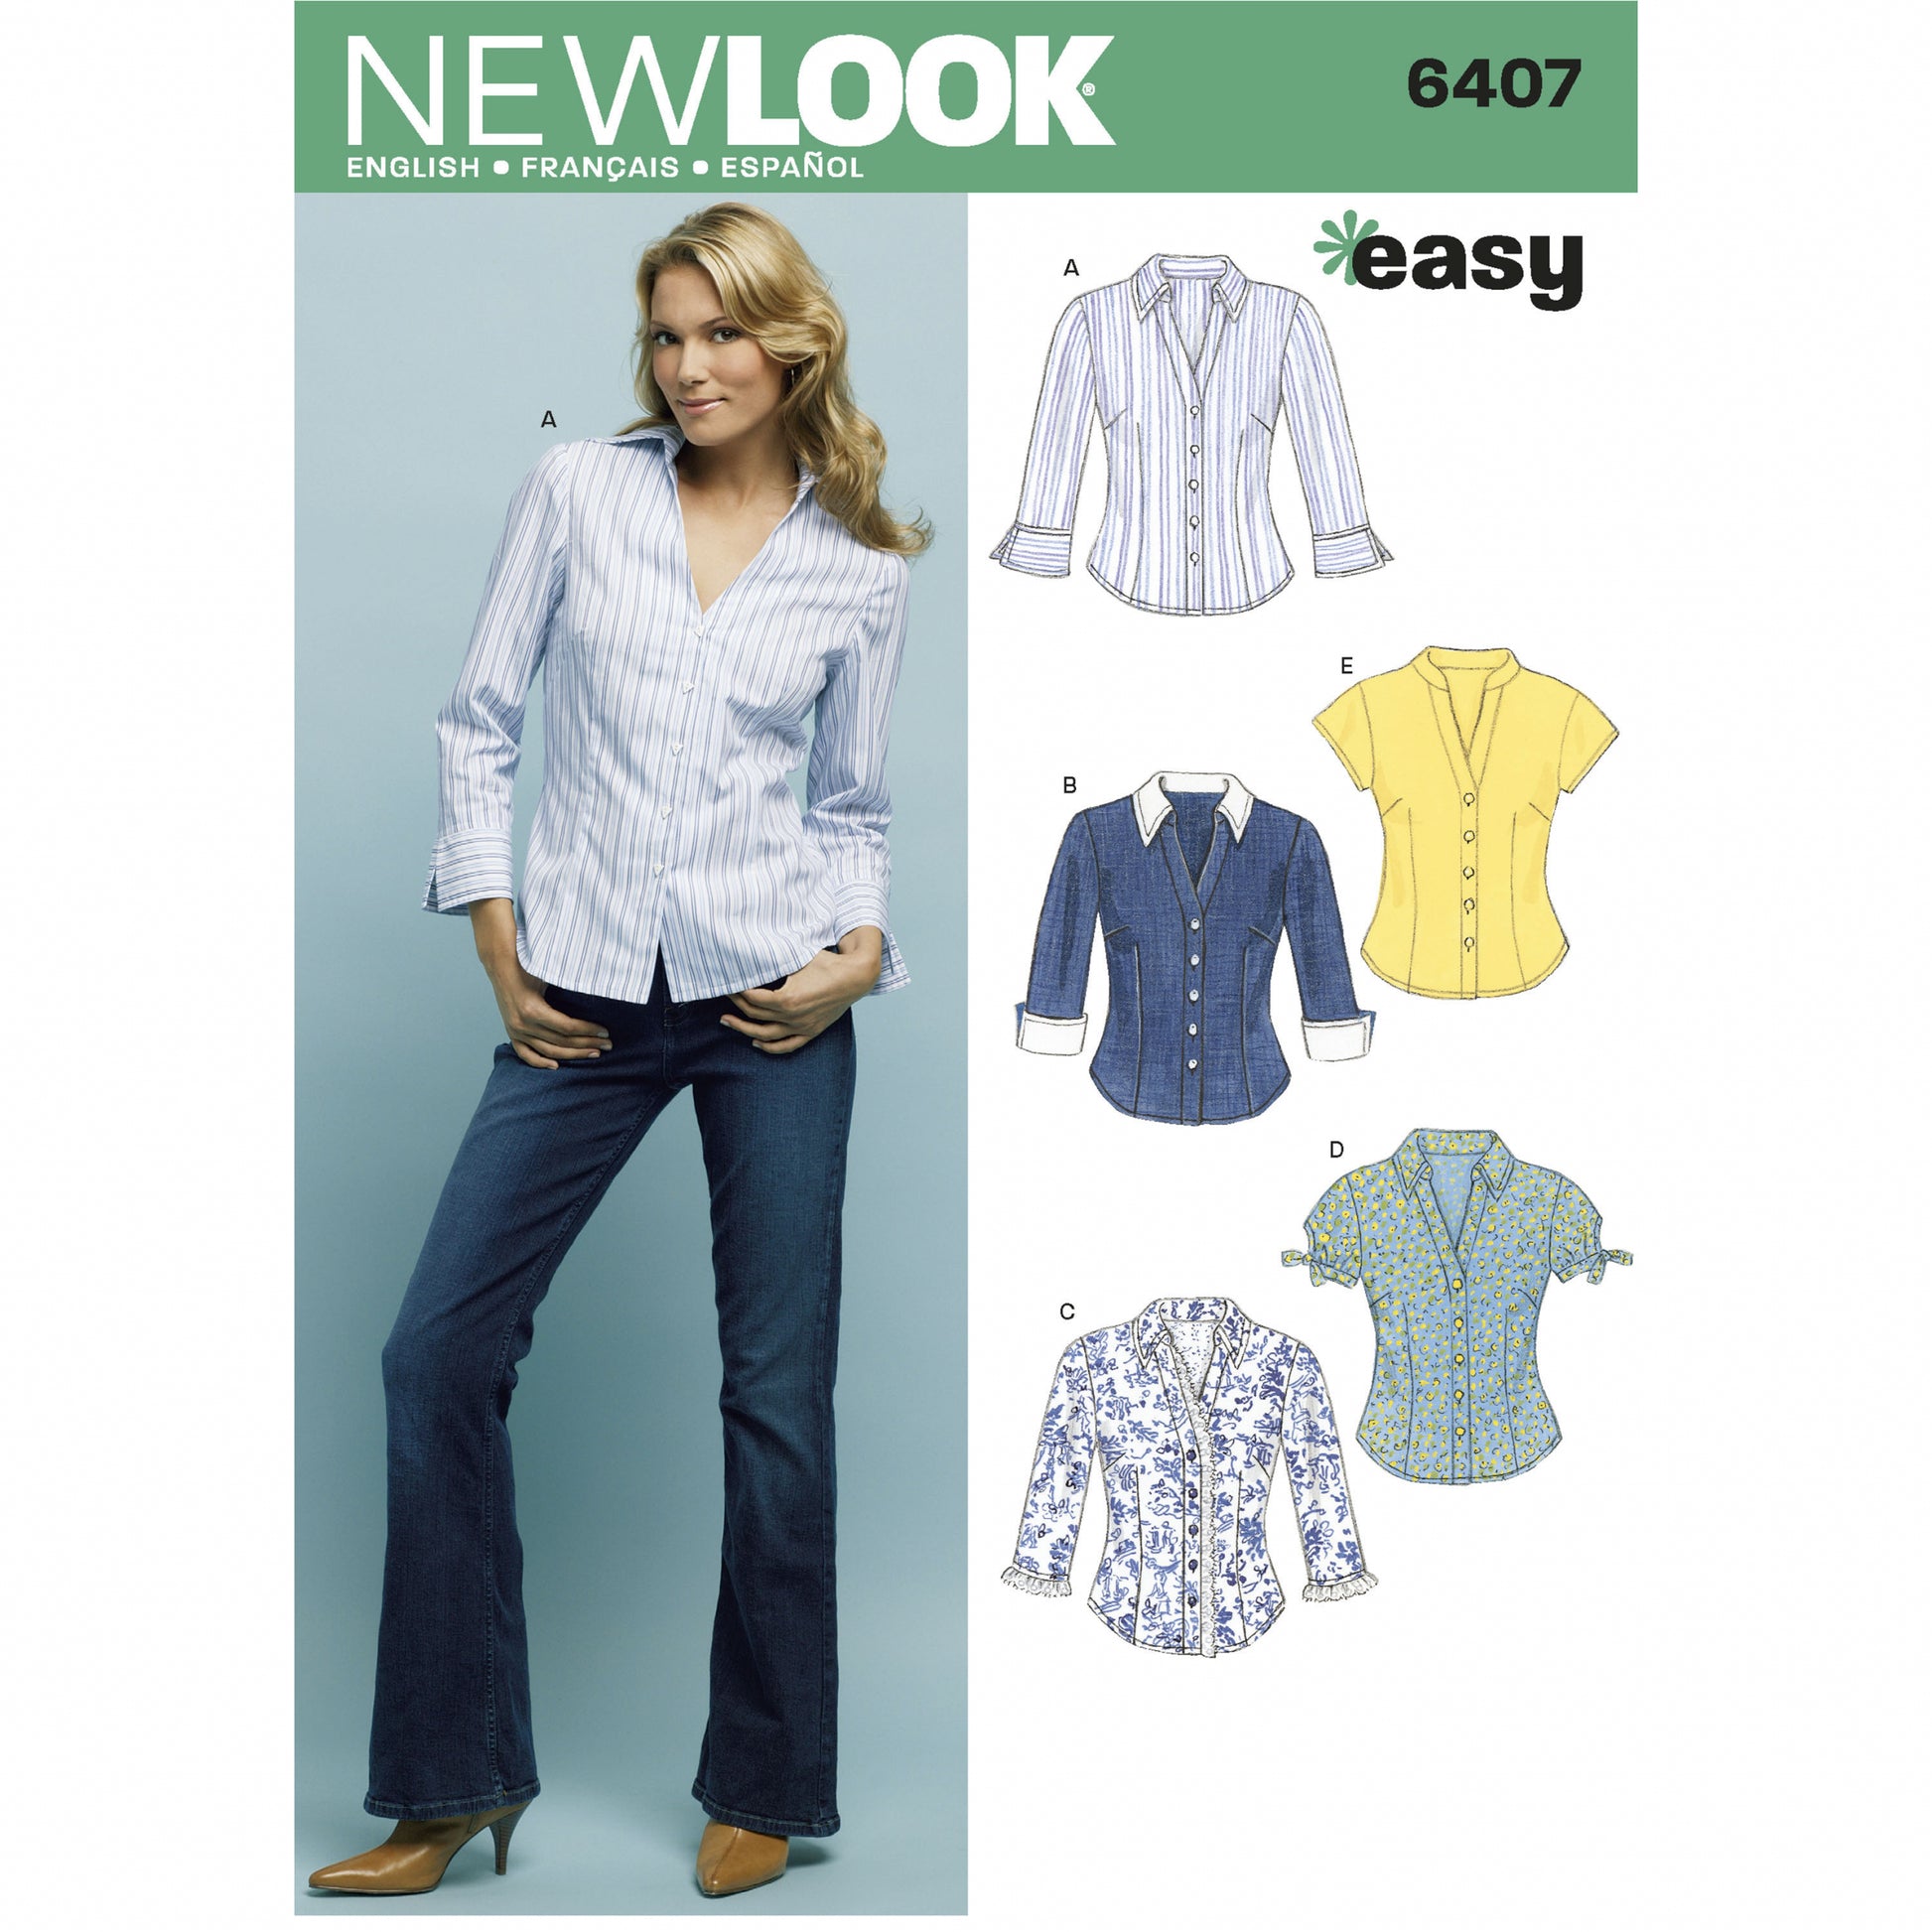 New Look Sewing Pattern 6407 N6407 Women's Tops - You’ve Got Me In Stitches